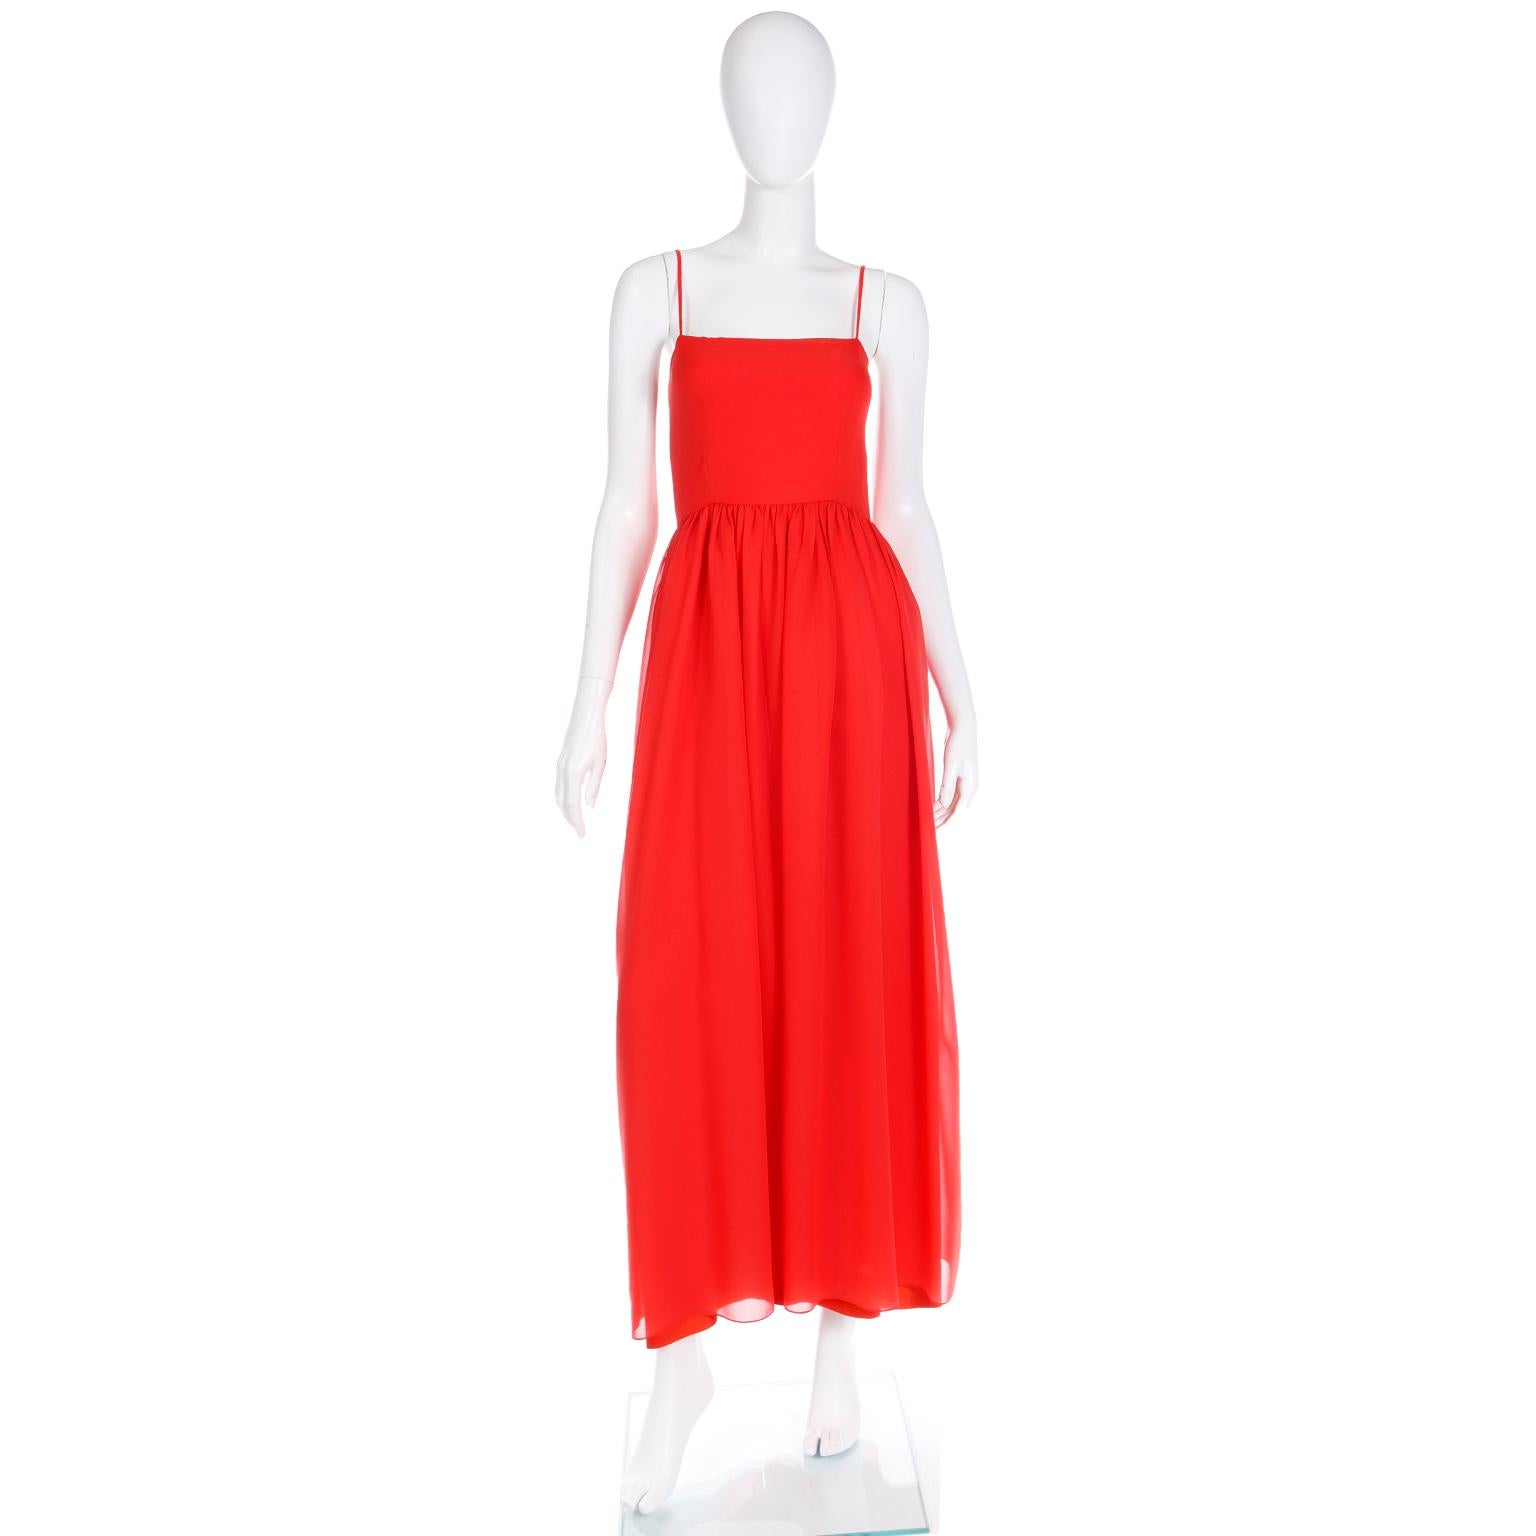 This simple but elegant vintage 1970's Lanvin red silk dress can be worn as an evening gown or a day dress, depending on the accessories and shoes you choose to wear with it. The dress is fitted at the gently gathered waist and it has a crepe lining